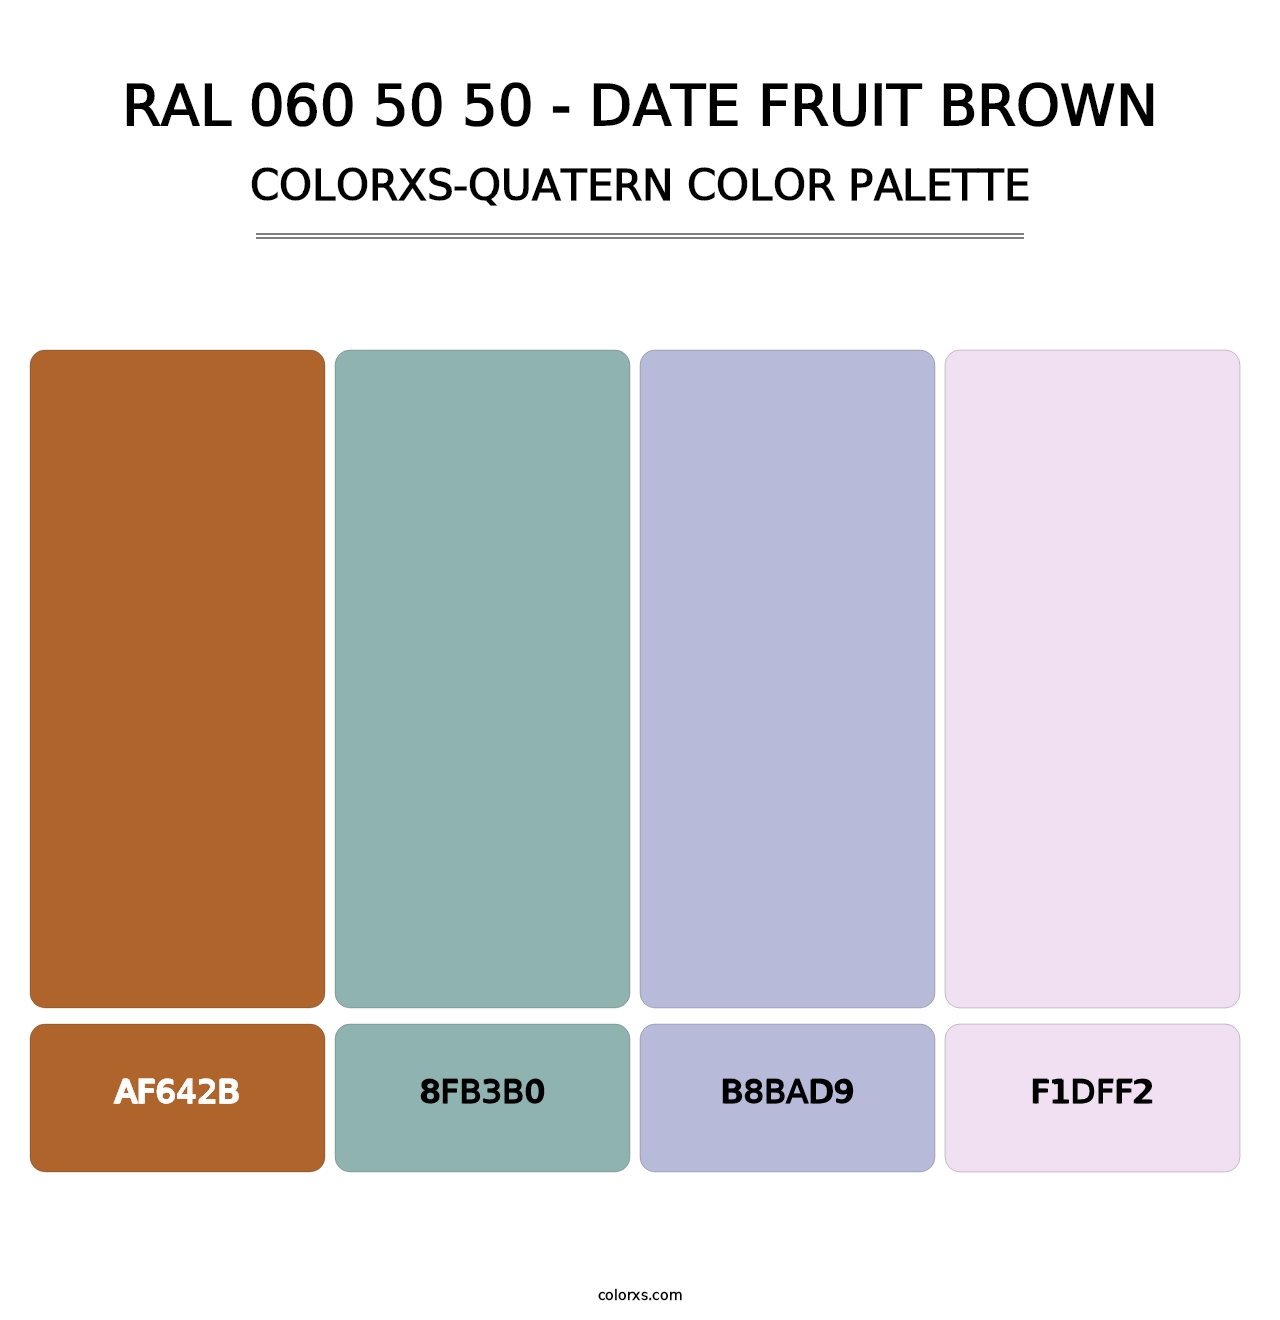 RAL 060 50 50 - Date Fruit Brown - Colorxs Quatern Palette